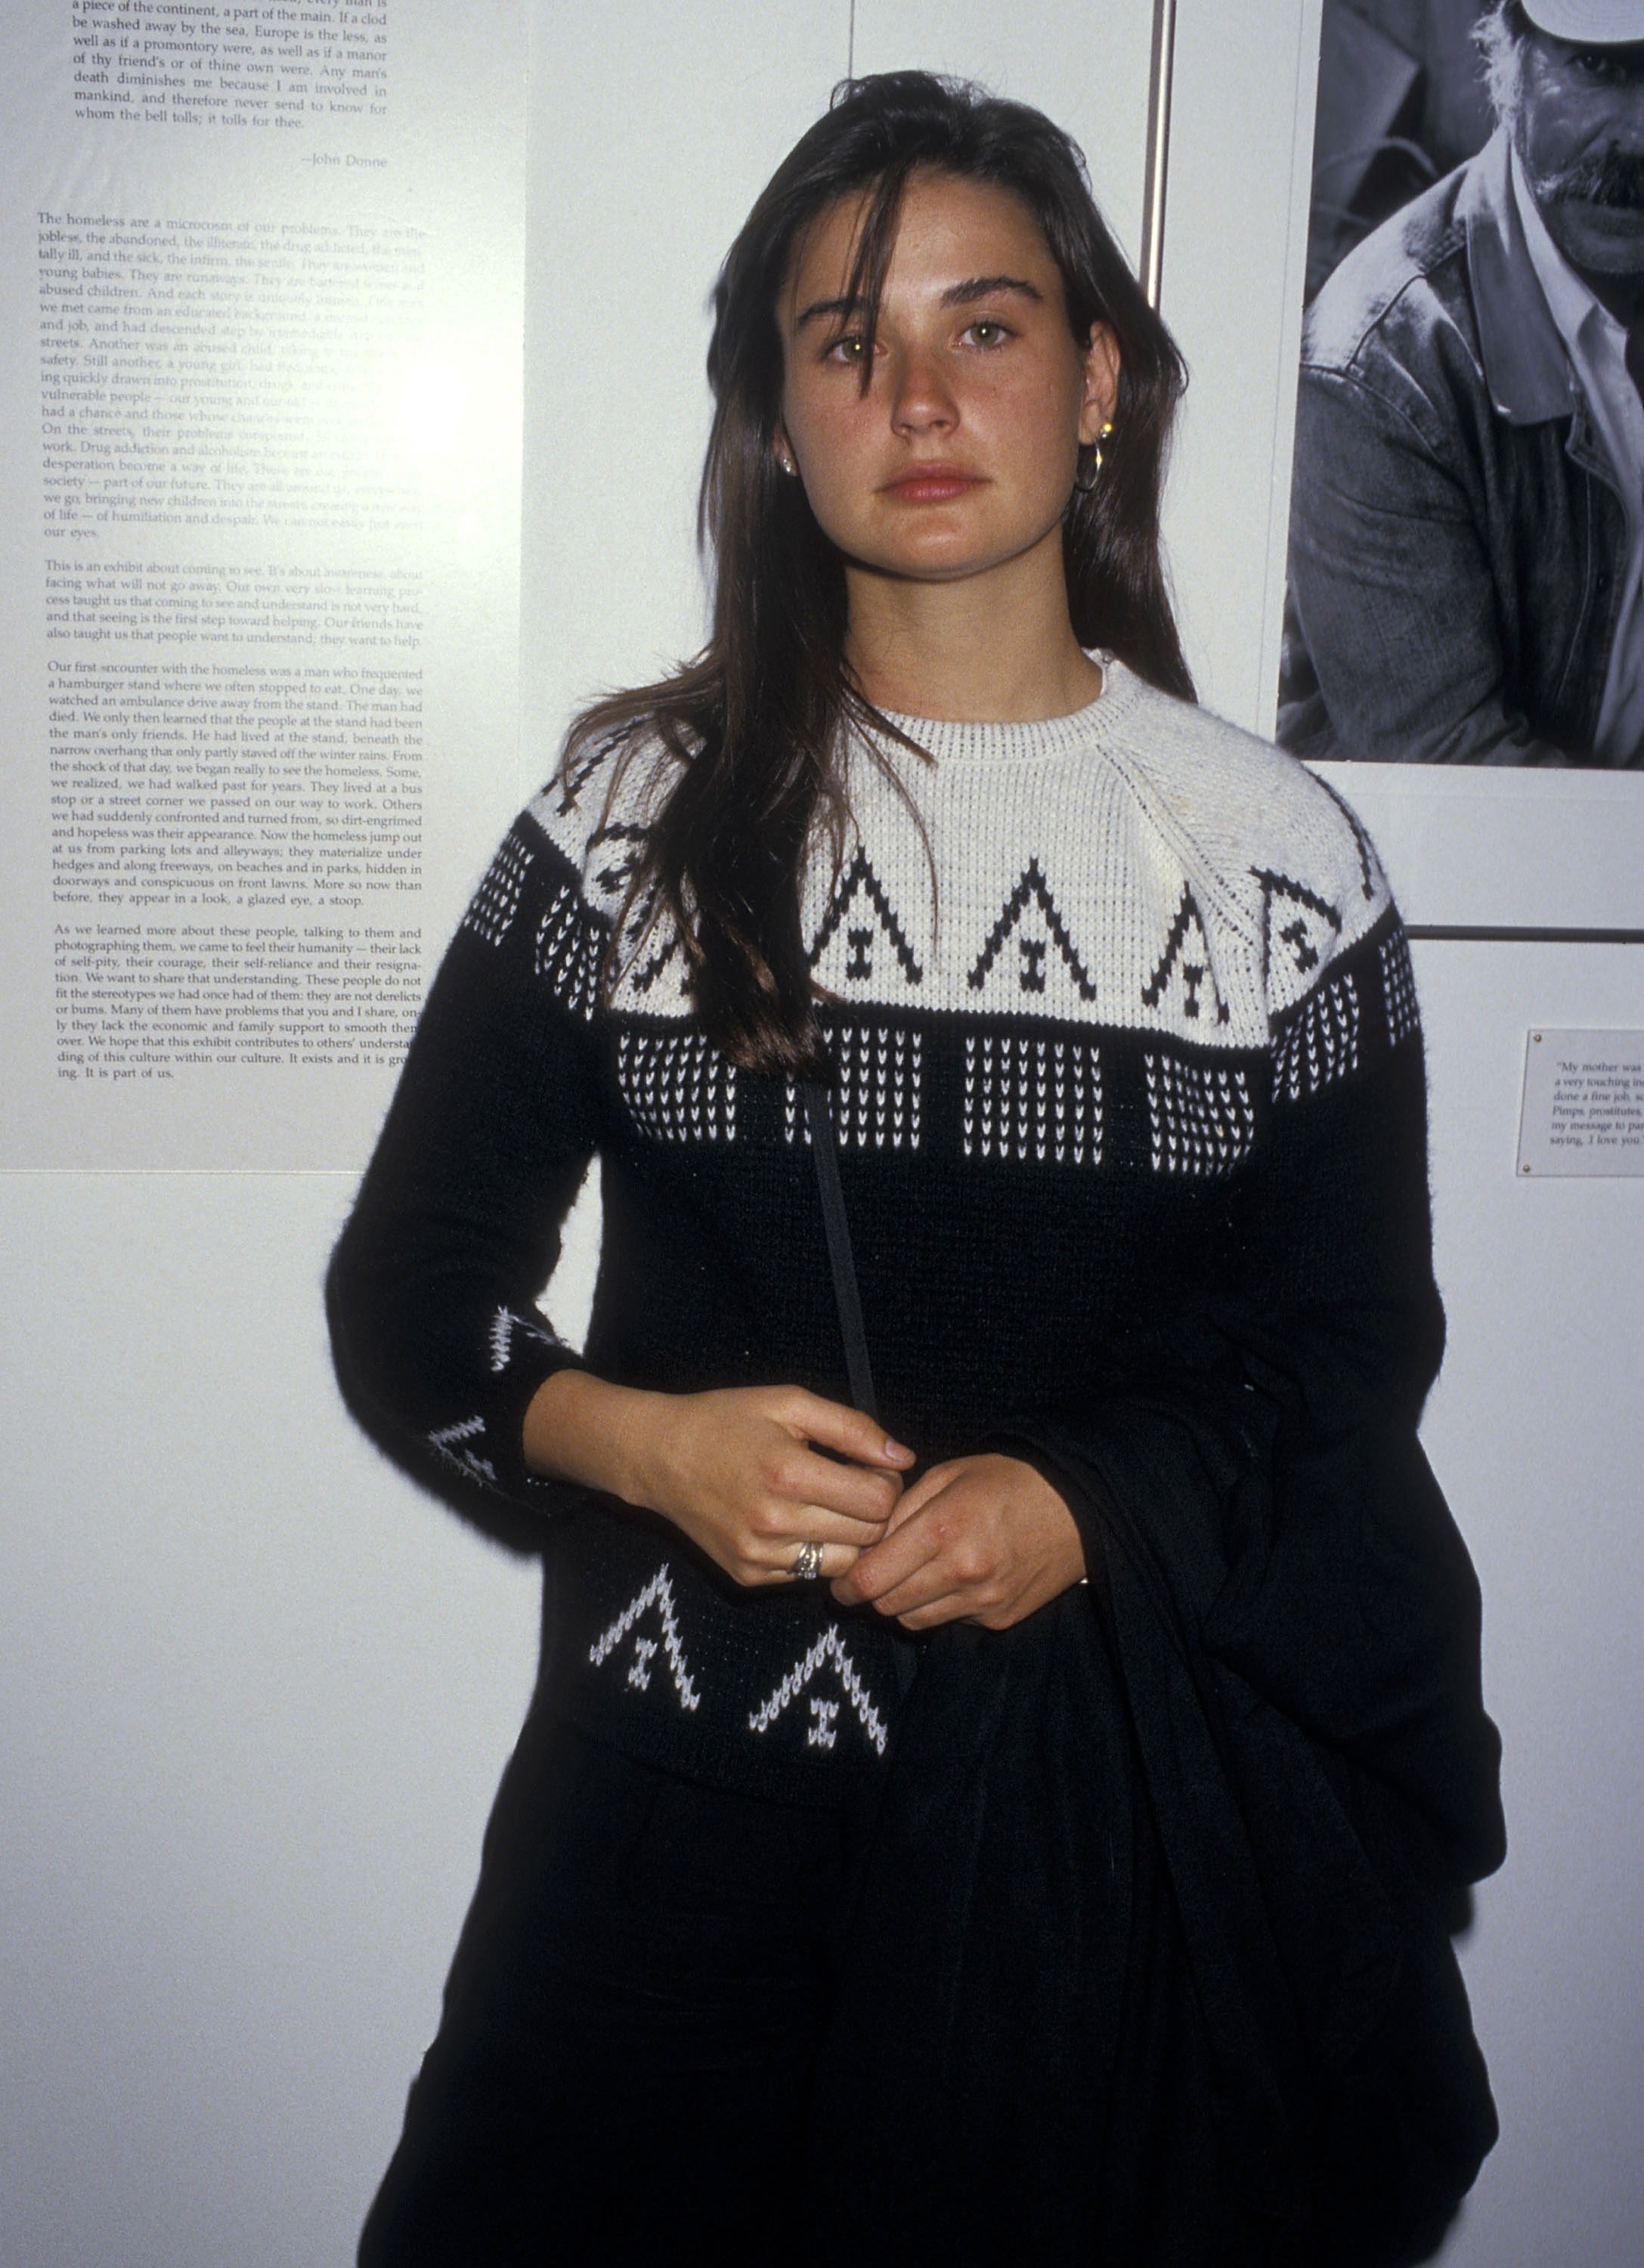 Demi Moore during the "Hard Times" Special Stage Performance at the Los Angeles Theatre Center on March 23, 1987 in Los Angeles, California. / Source: Getty Images